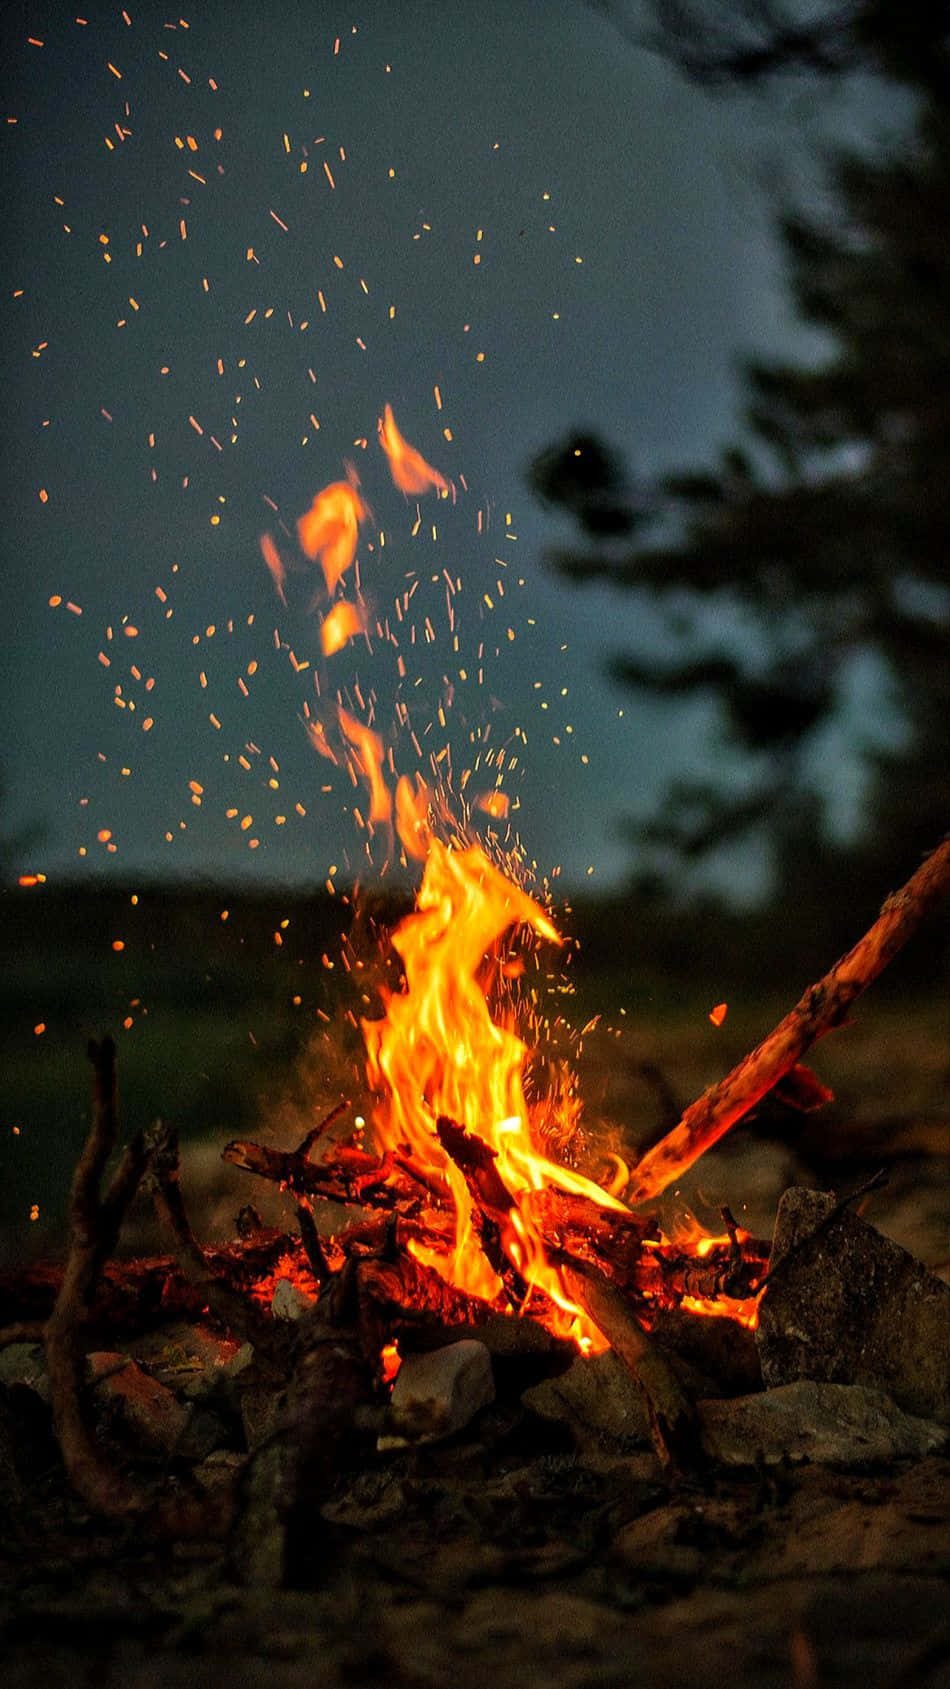 A Campfire With Fire And Sticks In The Night